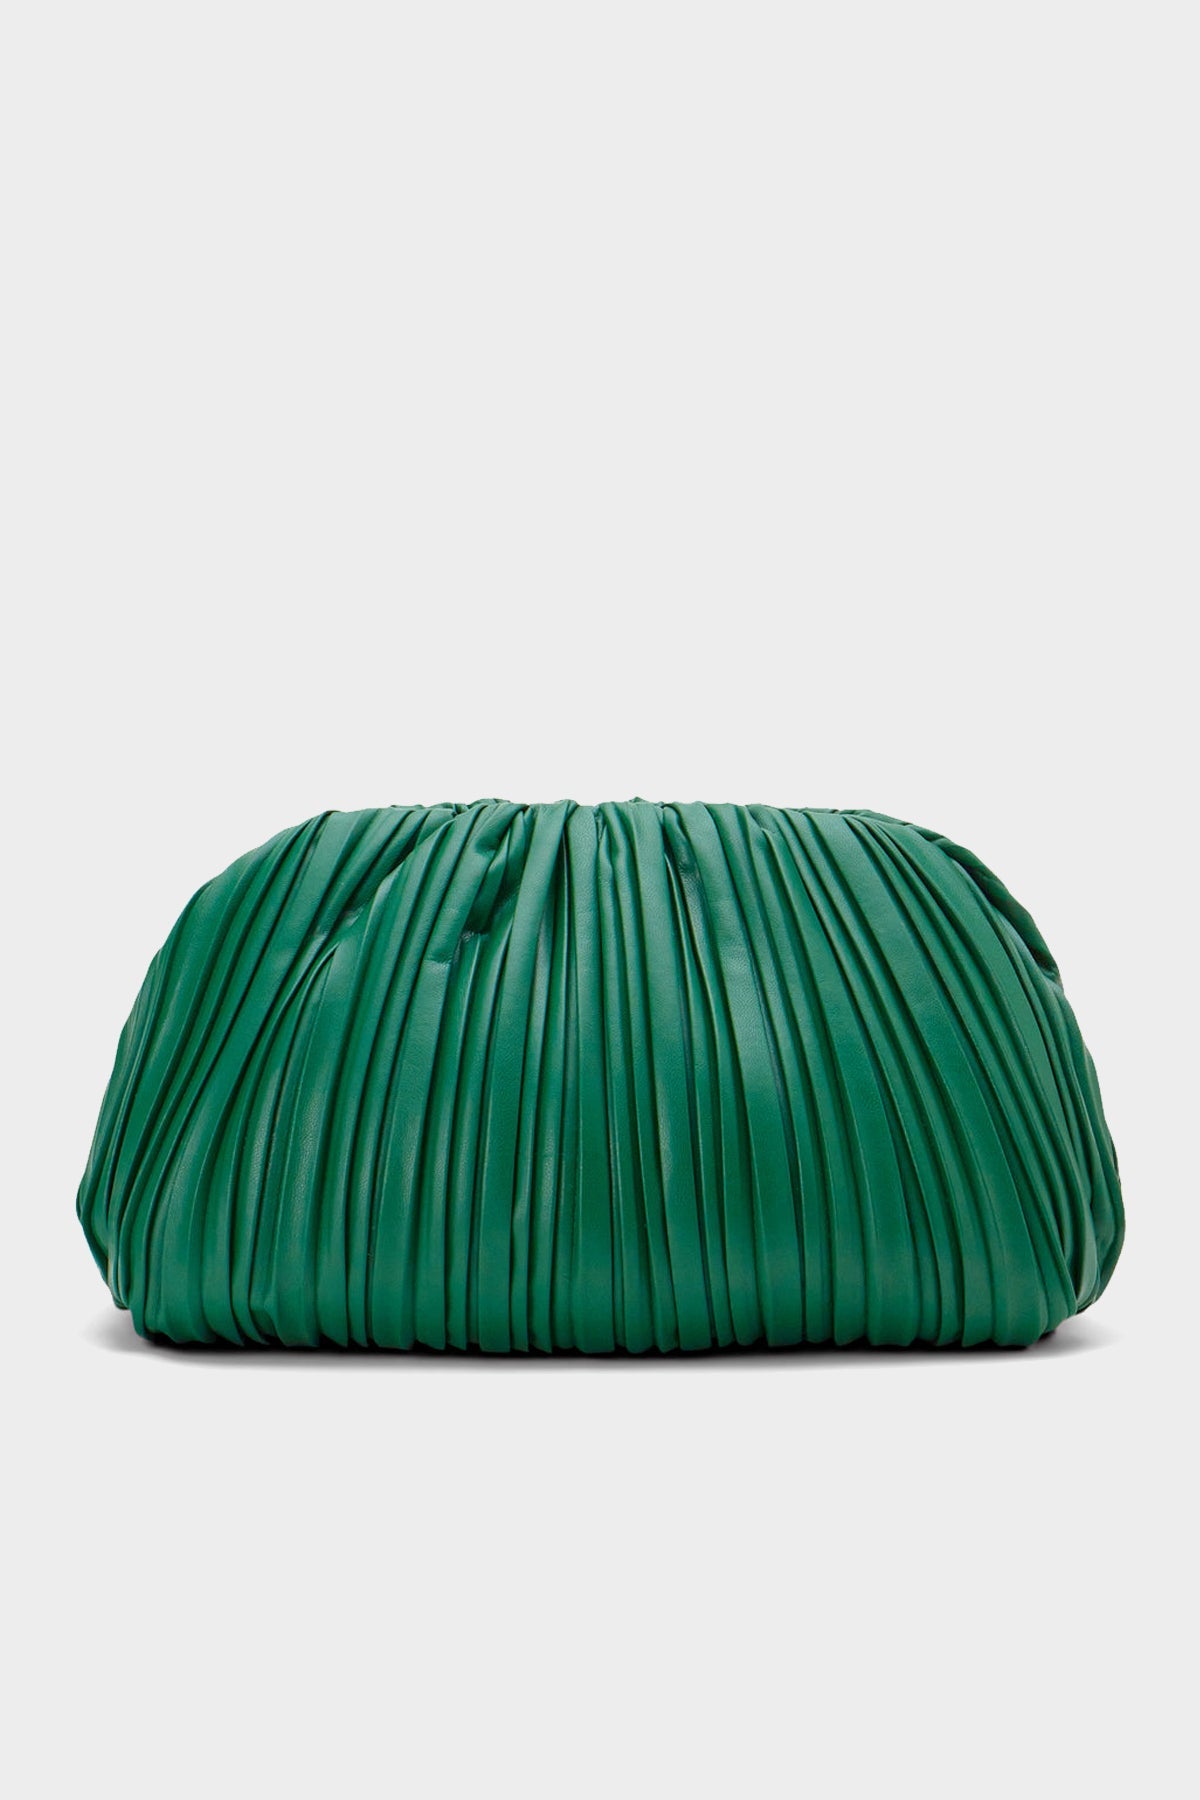 Romeo Pleated Vegan Leather Bag in Deep Forest - shop-olivia.com